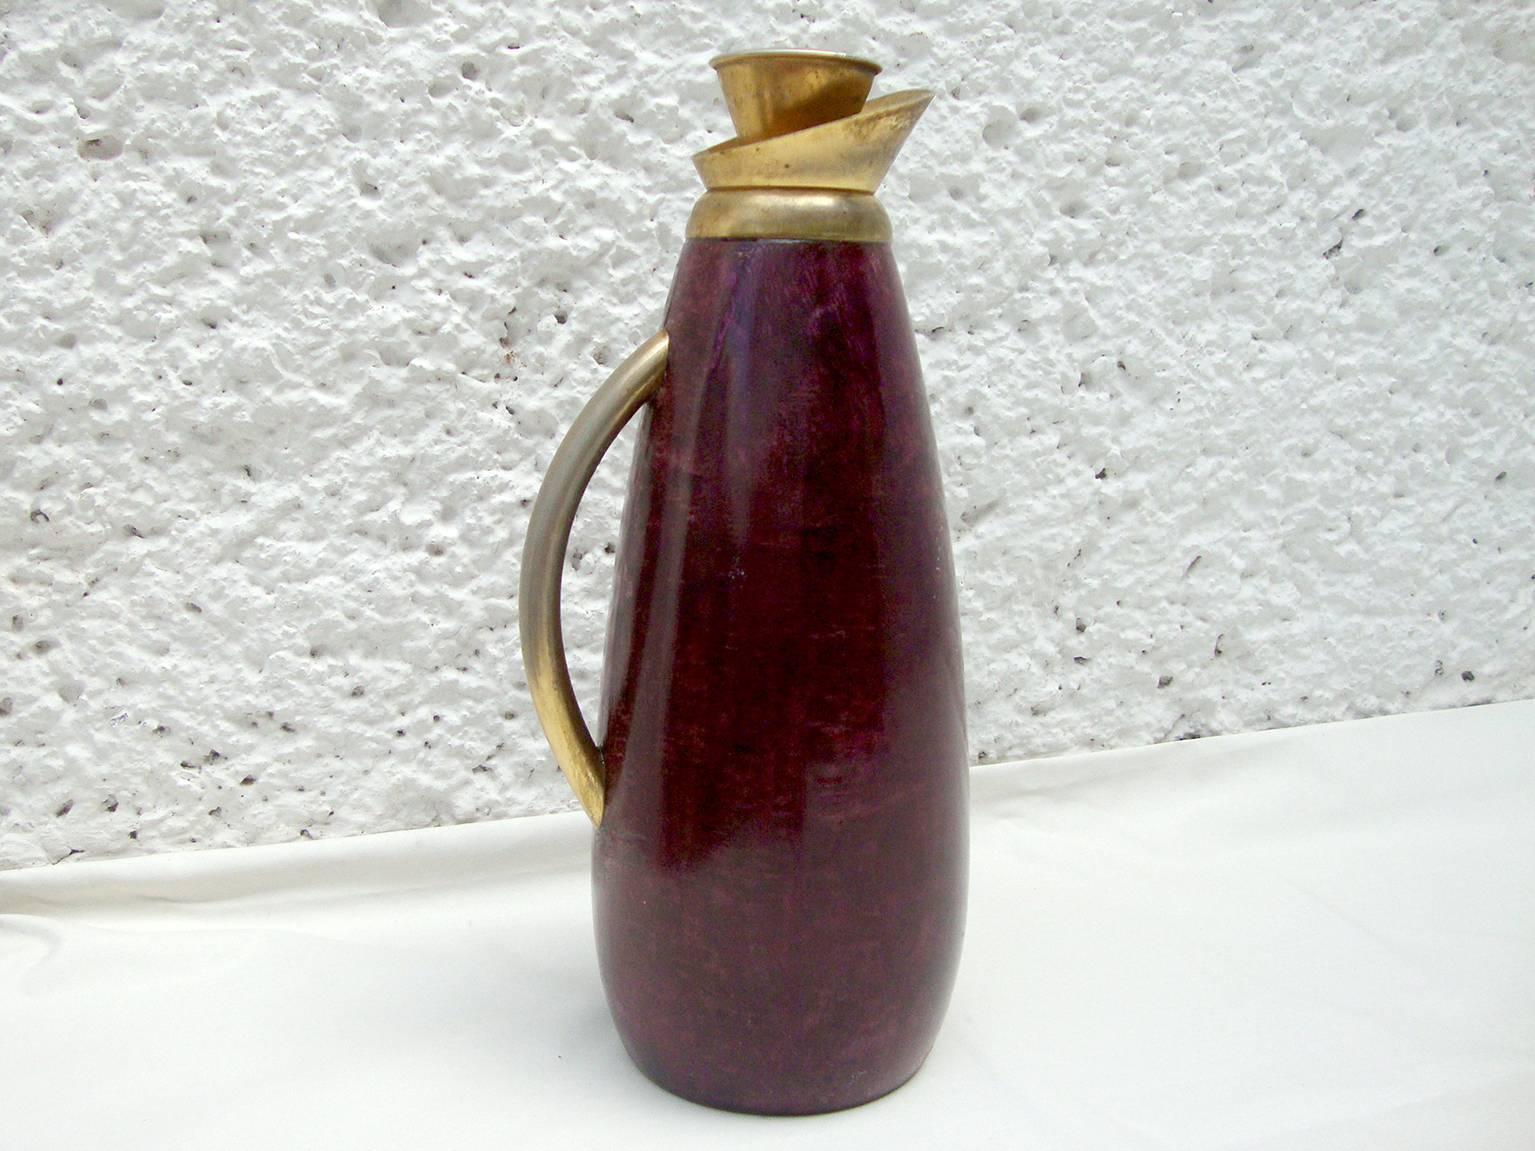 For your consideration a vintage Aldo Tura pitcher with red/wine color goatskin.

Handle and cork stopper in brass-plated metal. Some fading present due to use. 

Label from the maker underneath.
    